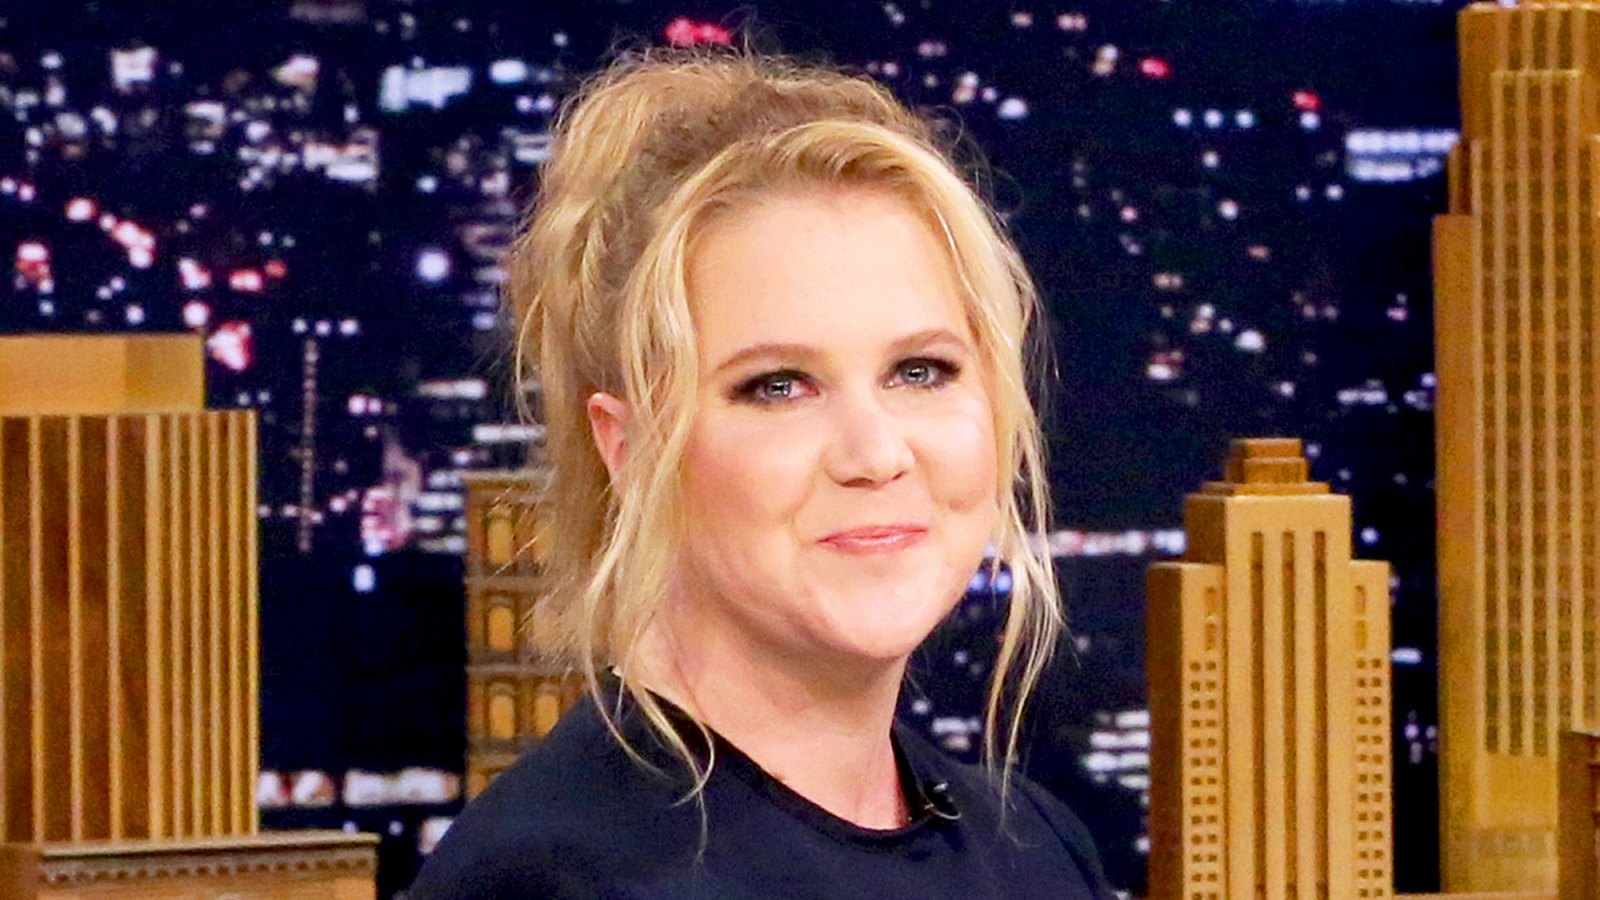 Amy Schumer Celebrities Who Love The Bachelor Gallery